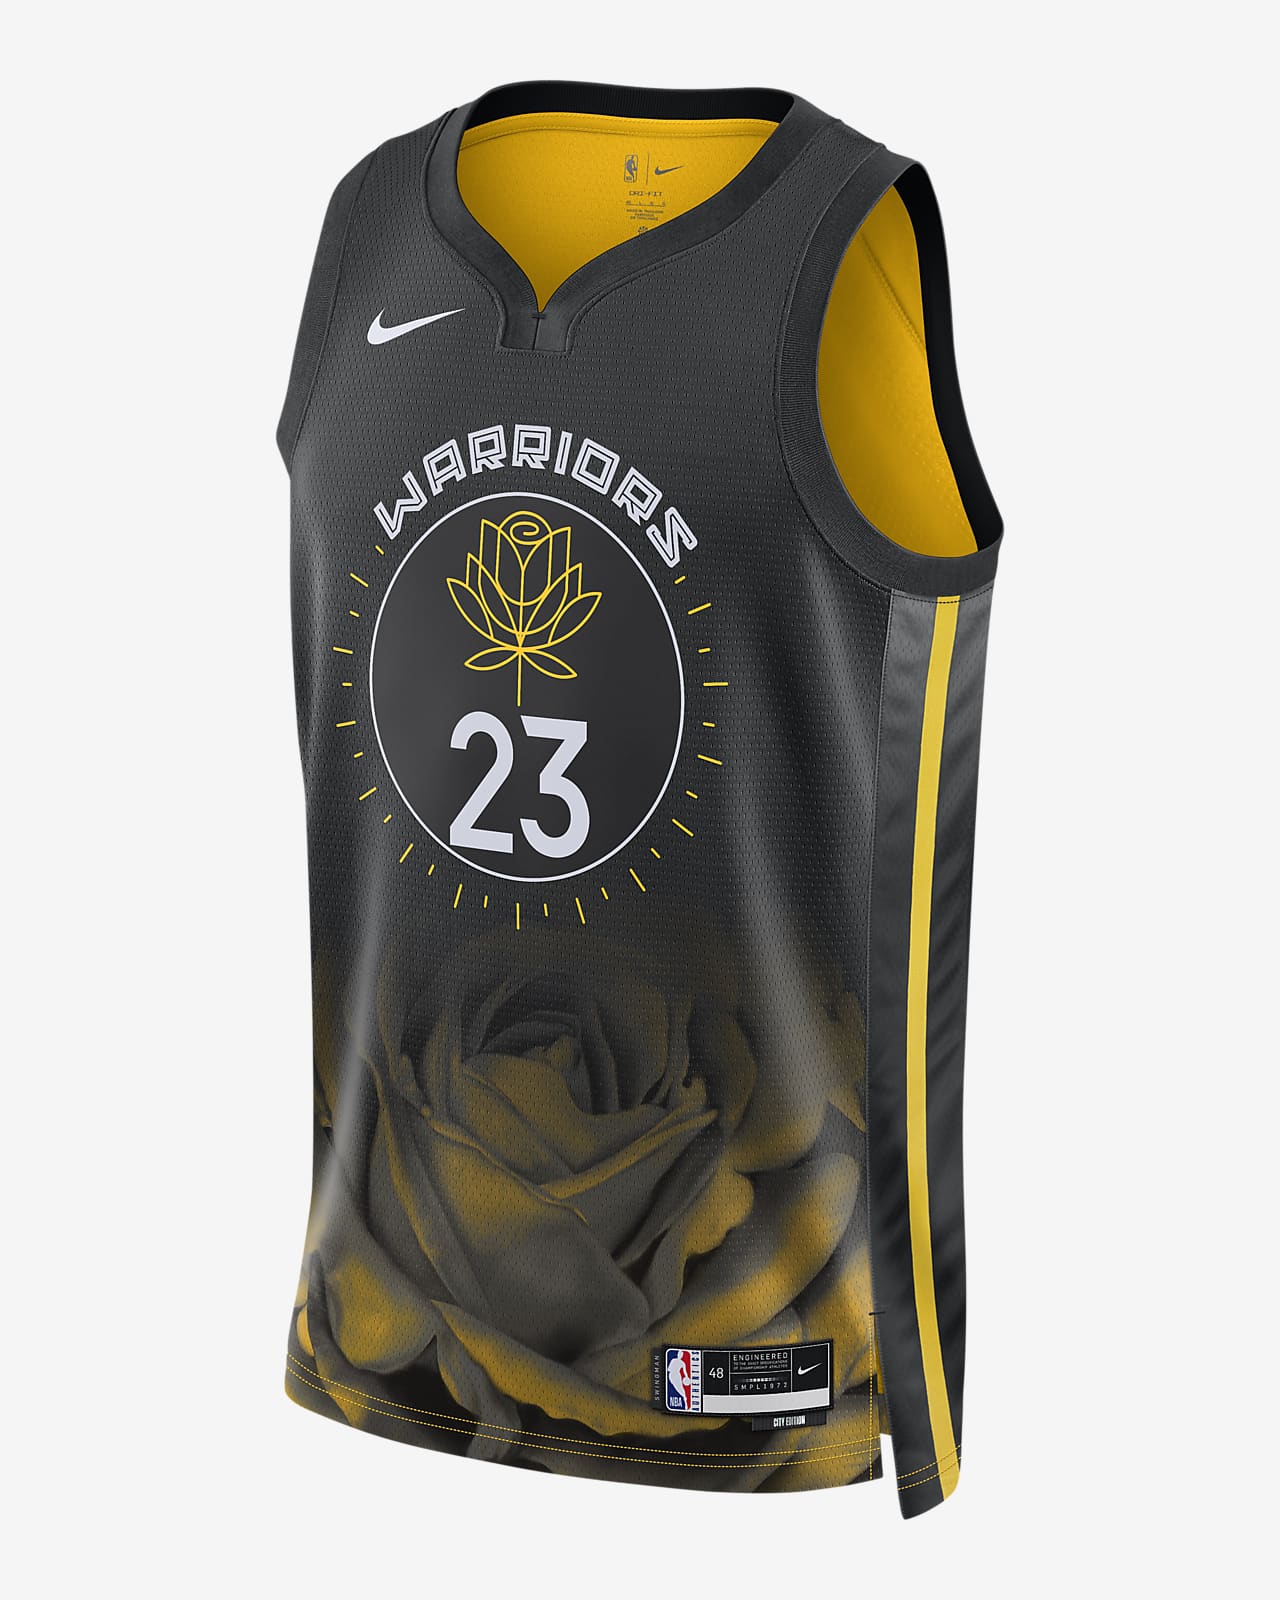 all of the warriors jerseys